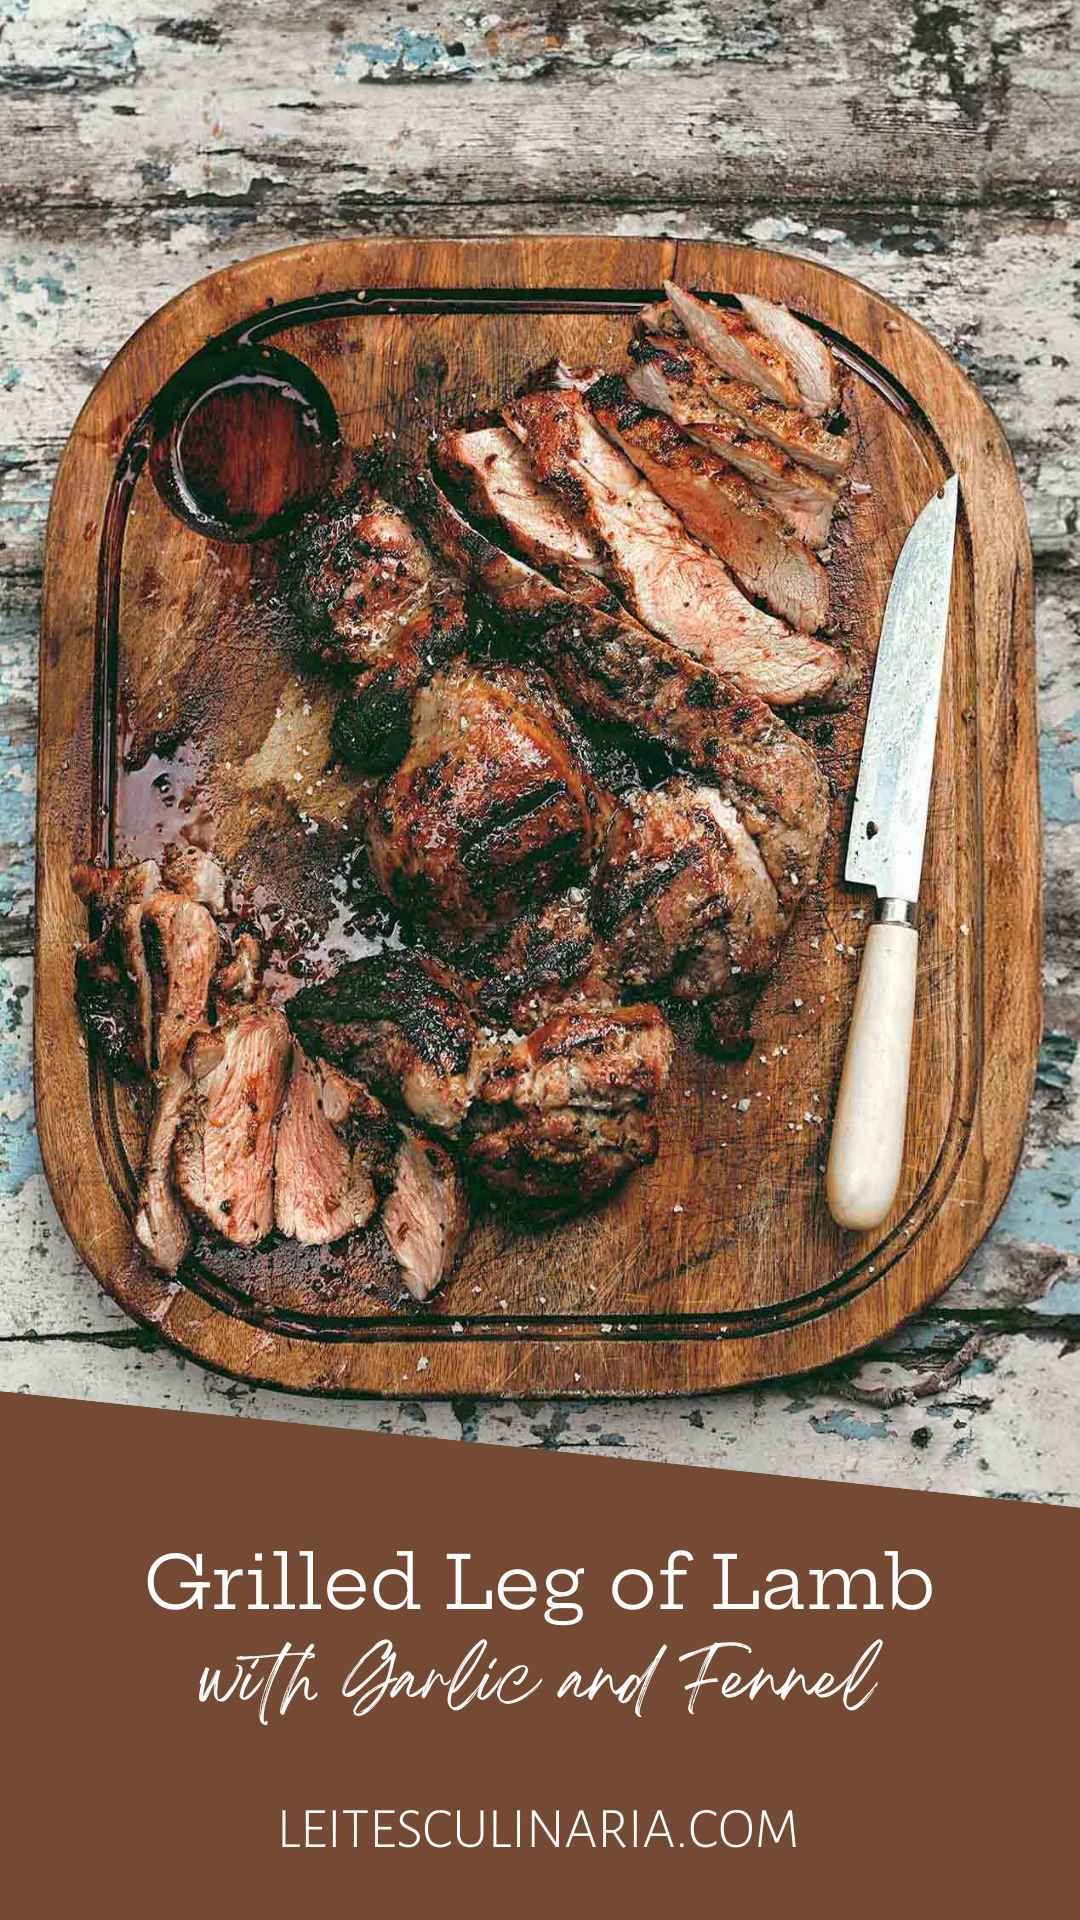 A carved butterflied grilled boneless leg of lamb on a wooden cutting board with a knife resting beside the meat.